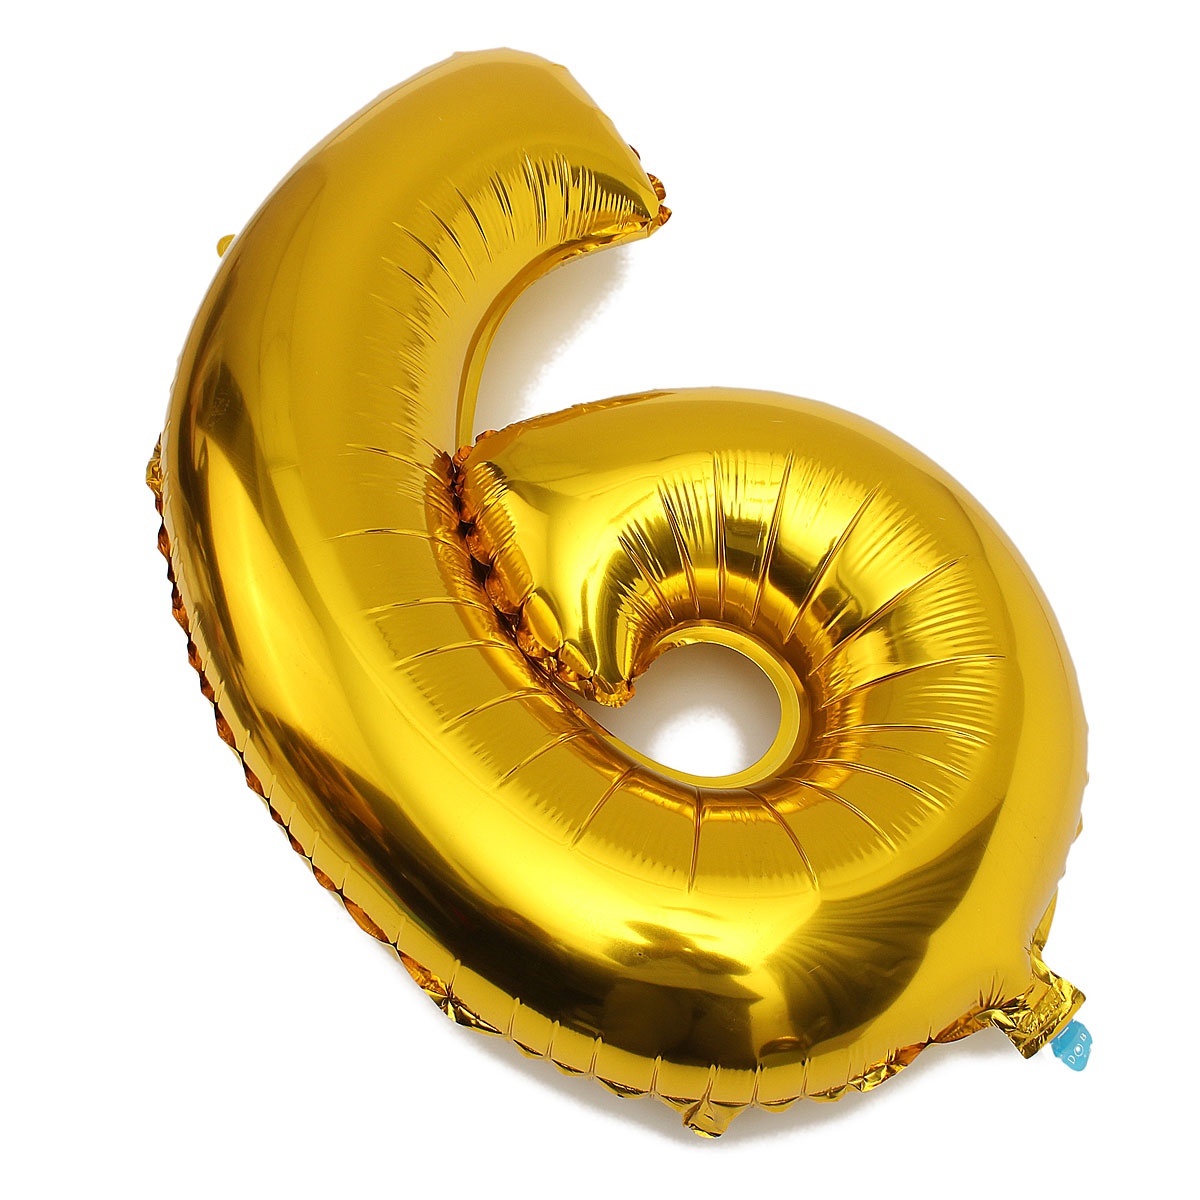 Gold-Silver-Number-Foil-Balloon-Wedding-Birthday-Party-Decoration-971829-8